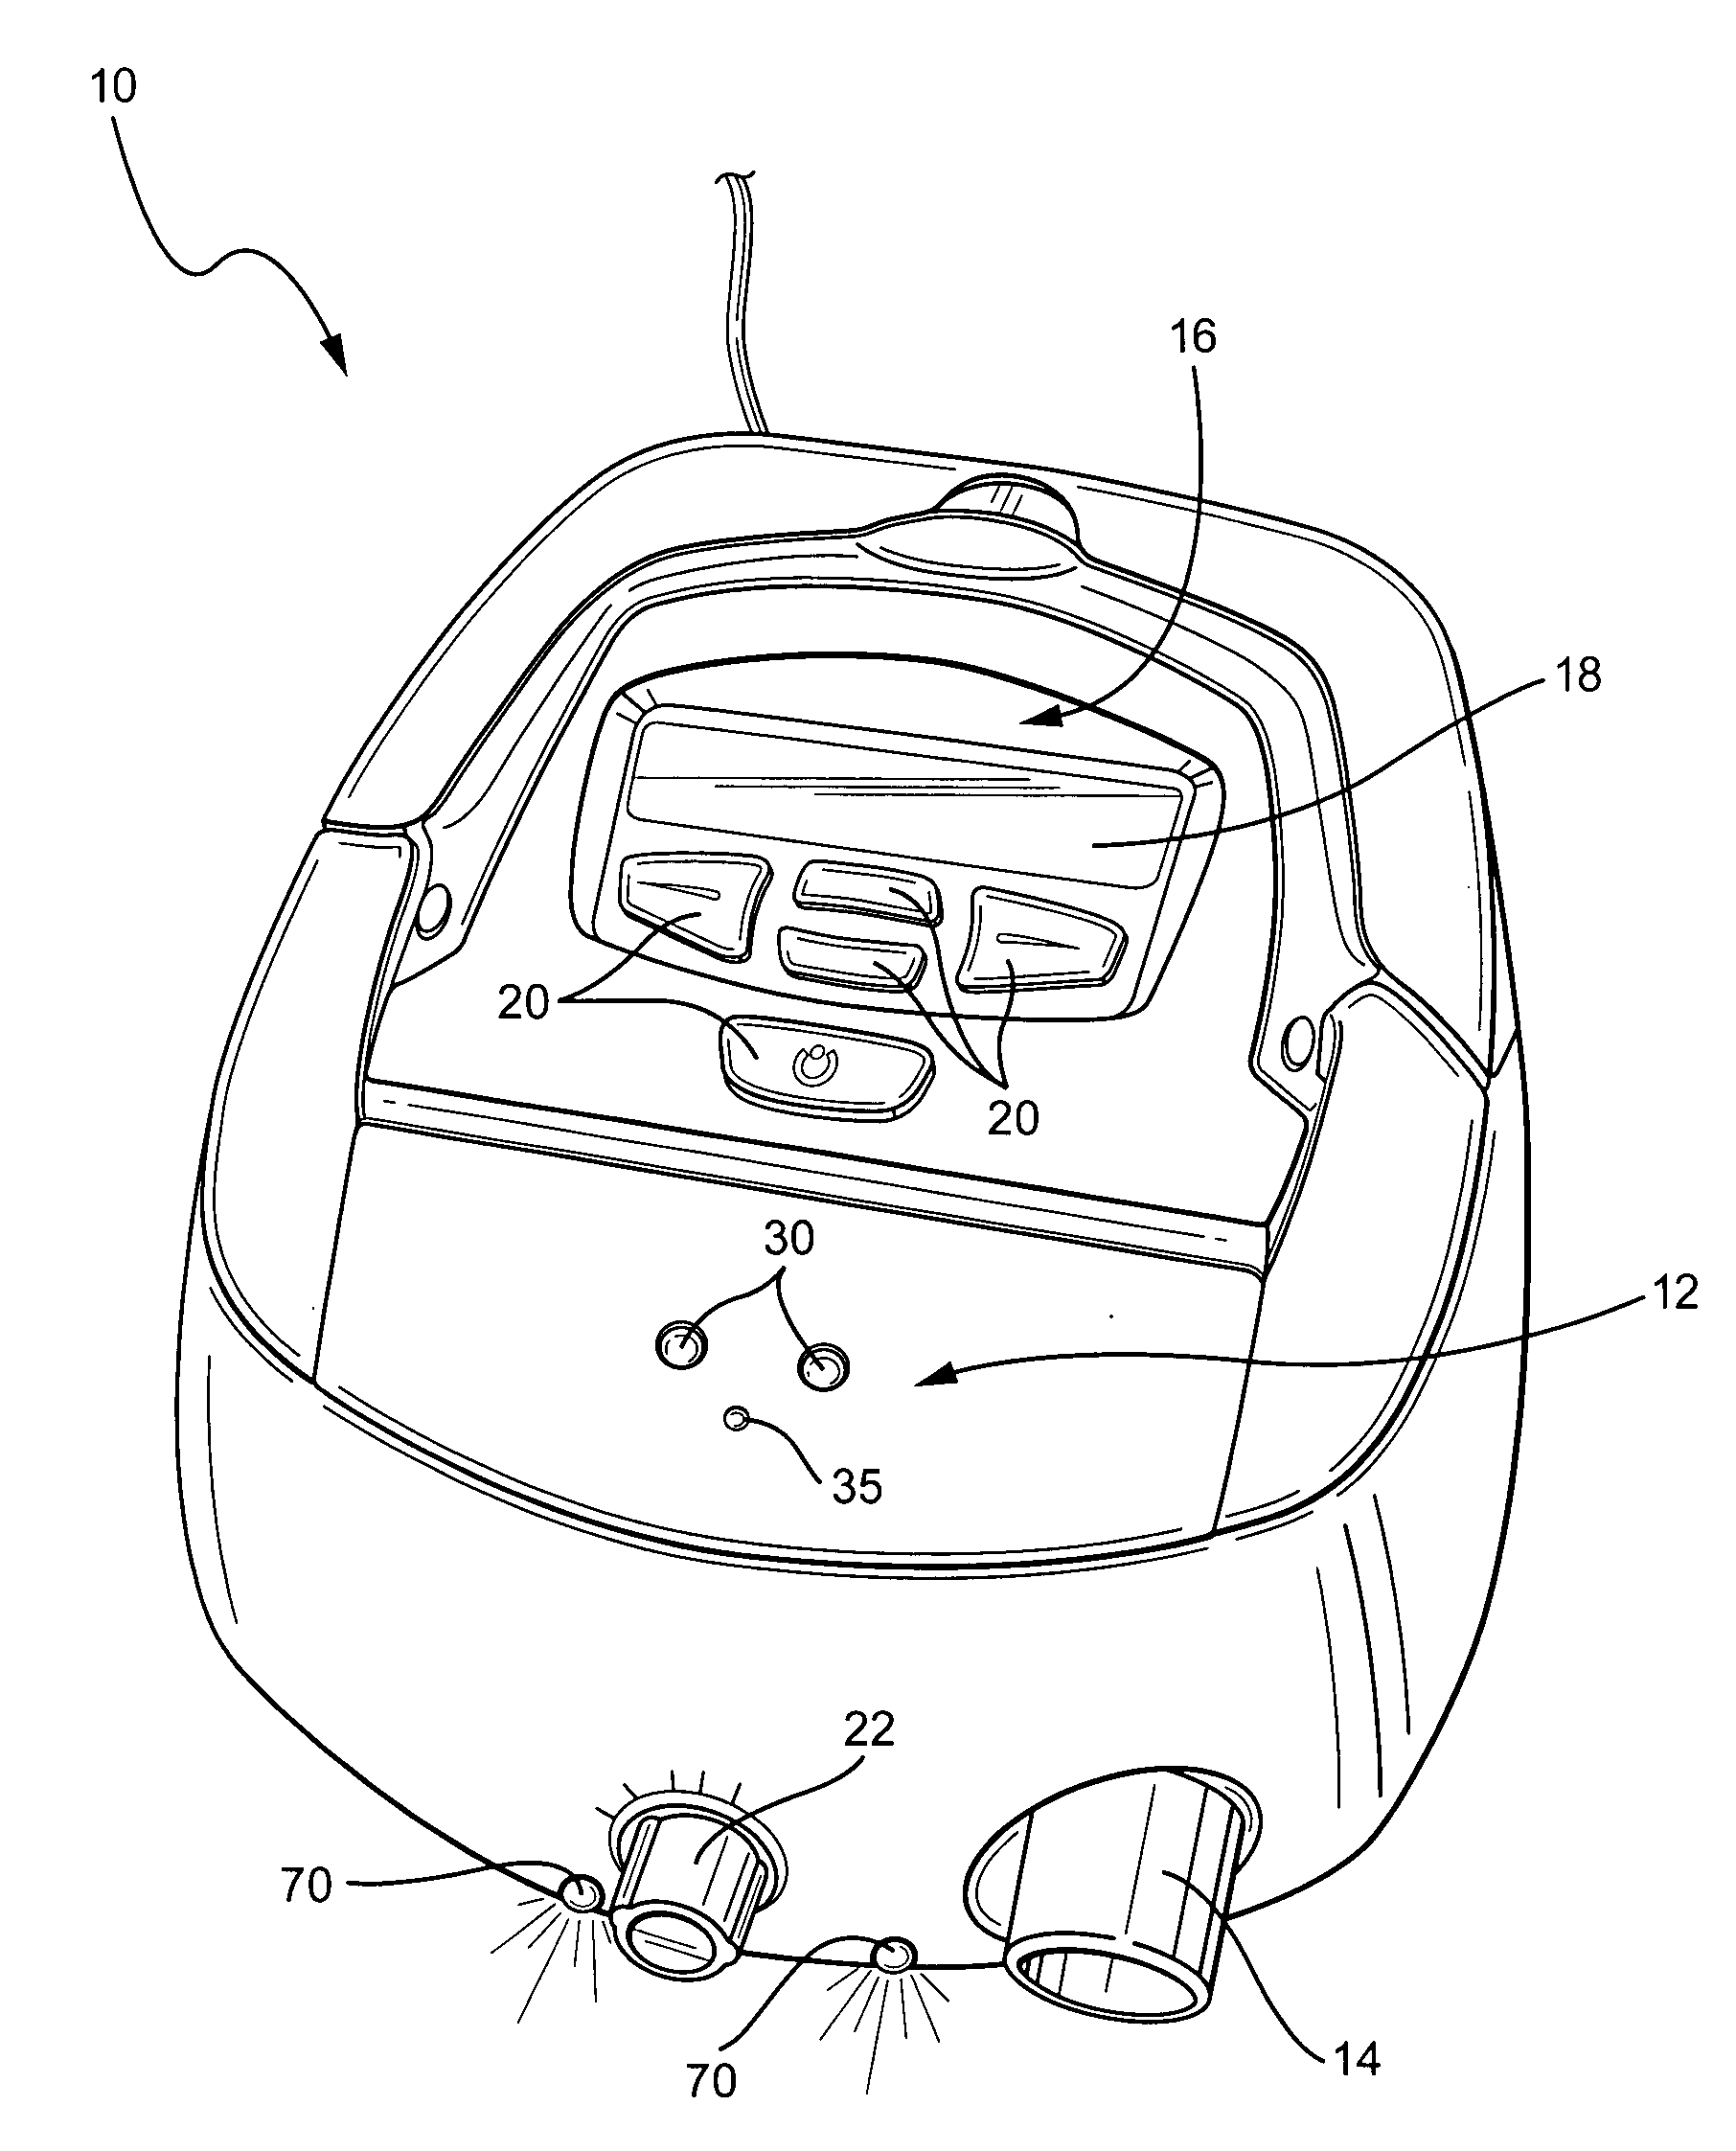 Touchless control system for breathing apparatus